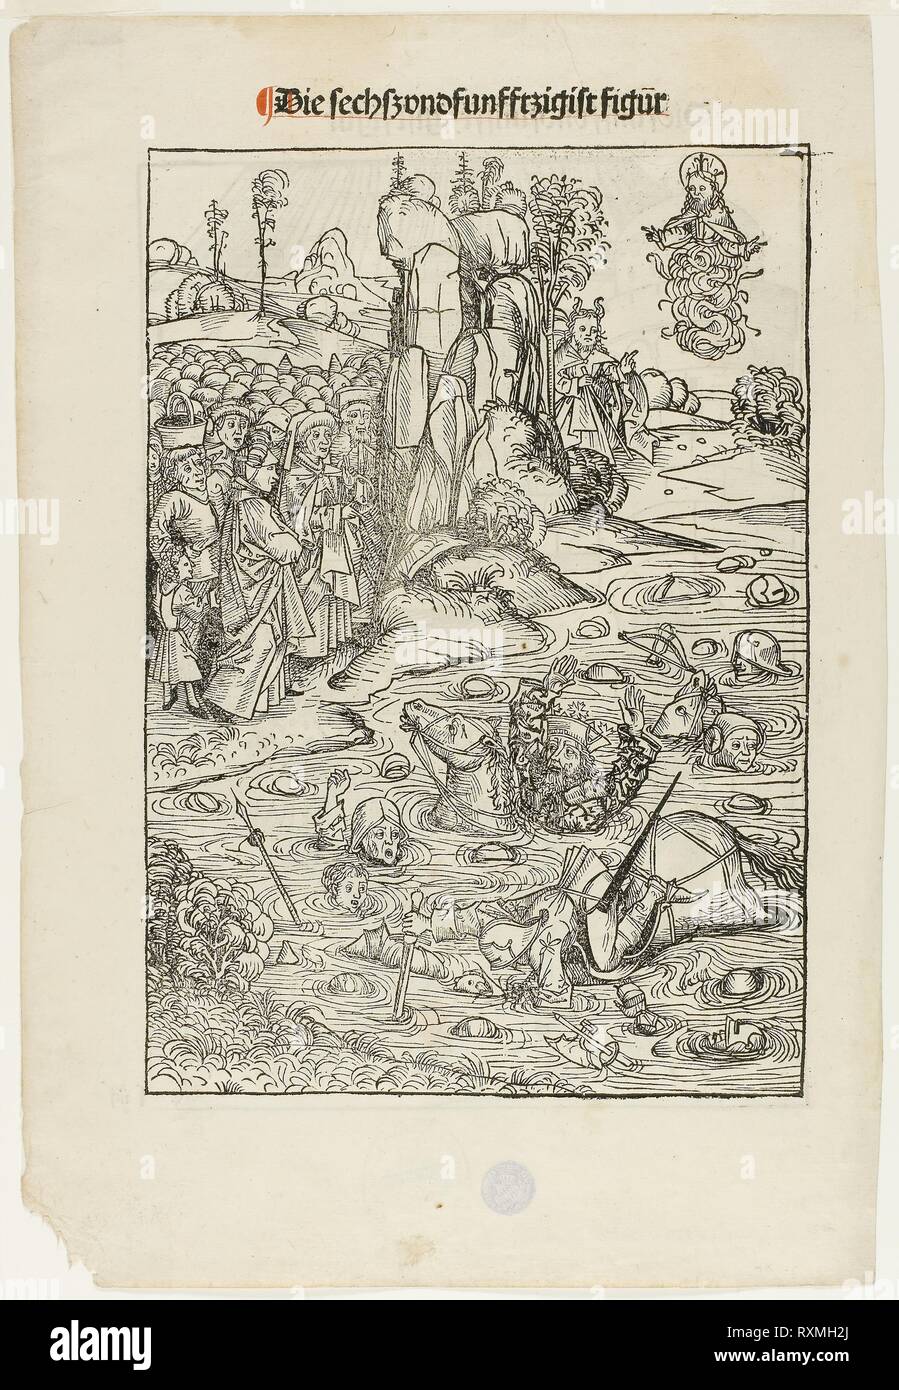 Pharoah and His Host Perishing in the Red Sea (verso); The Freeing of King Joachim of Jerusalem (recto), pages 56 and 55, from the Treasury (Schatzbehalter). Michael Wolgemut and Workshop (German, 1434/37-1519); published by Anton Koberger (German, 1440-1513). Date: 1491. Dimensions: 252 x 180 mm (image/block, verso) 250 x 173 mm; (image/block, recto); 335 x 228 mm (sheet). Woodcut in black on cream laid paper. Origin: Germany. Museum: The Chicago Art Institute. Stock Photo